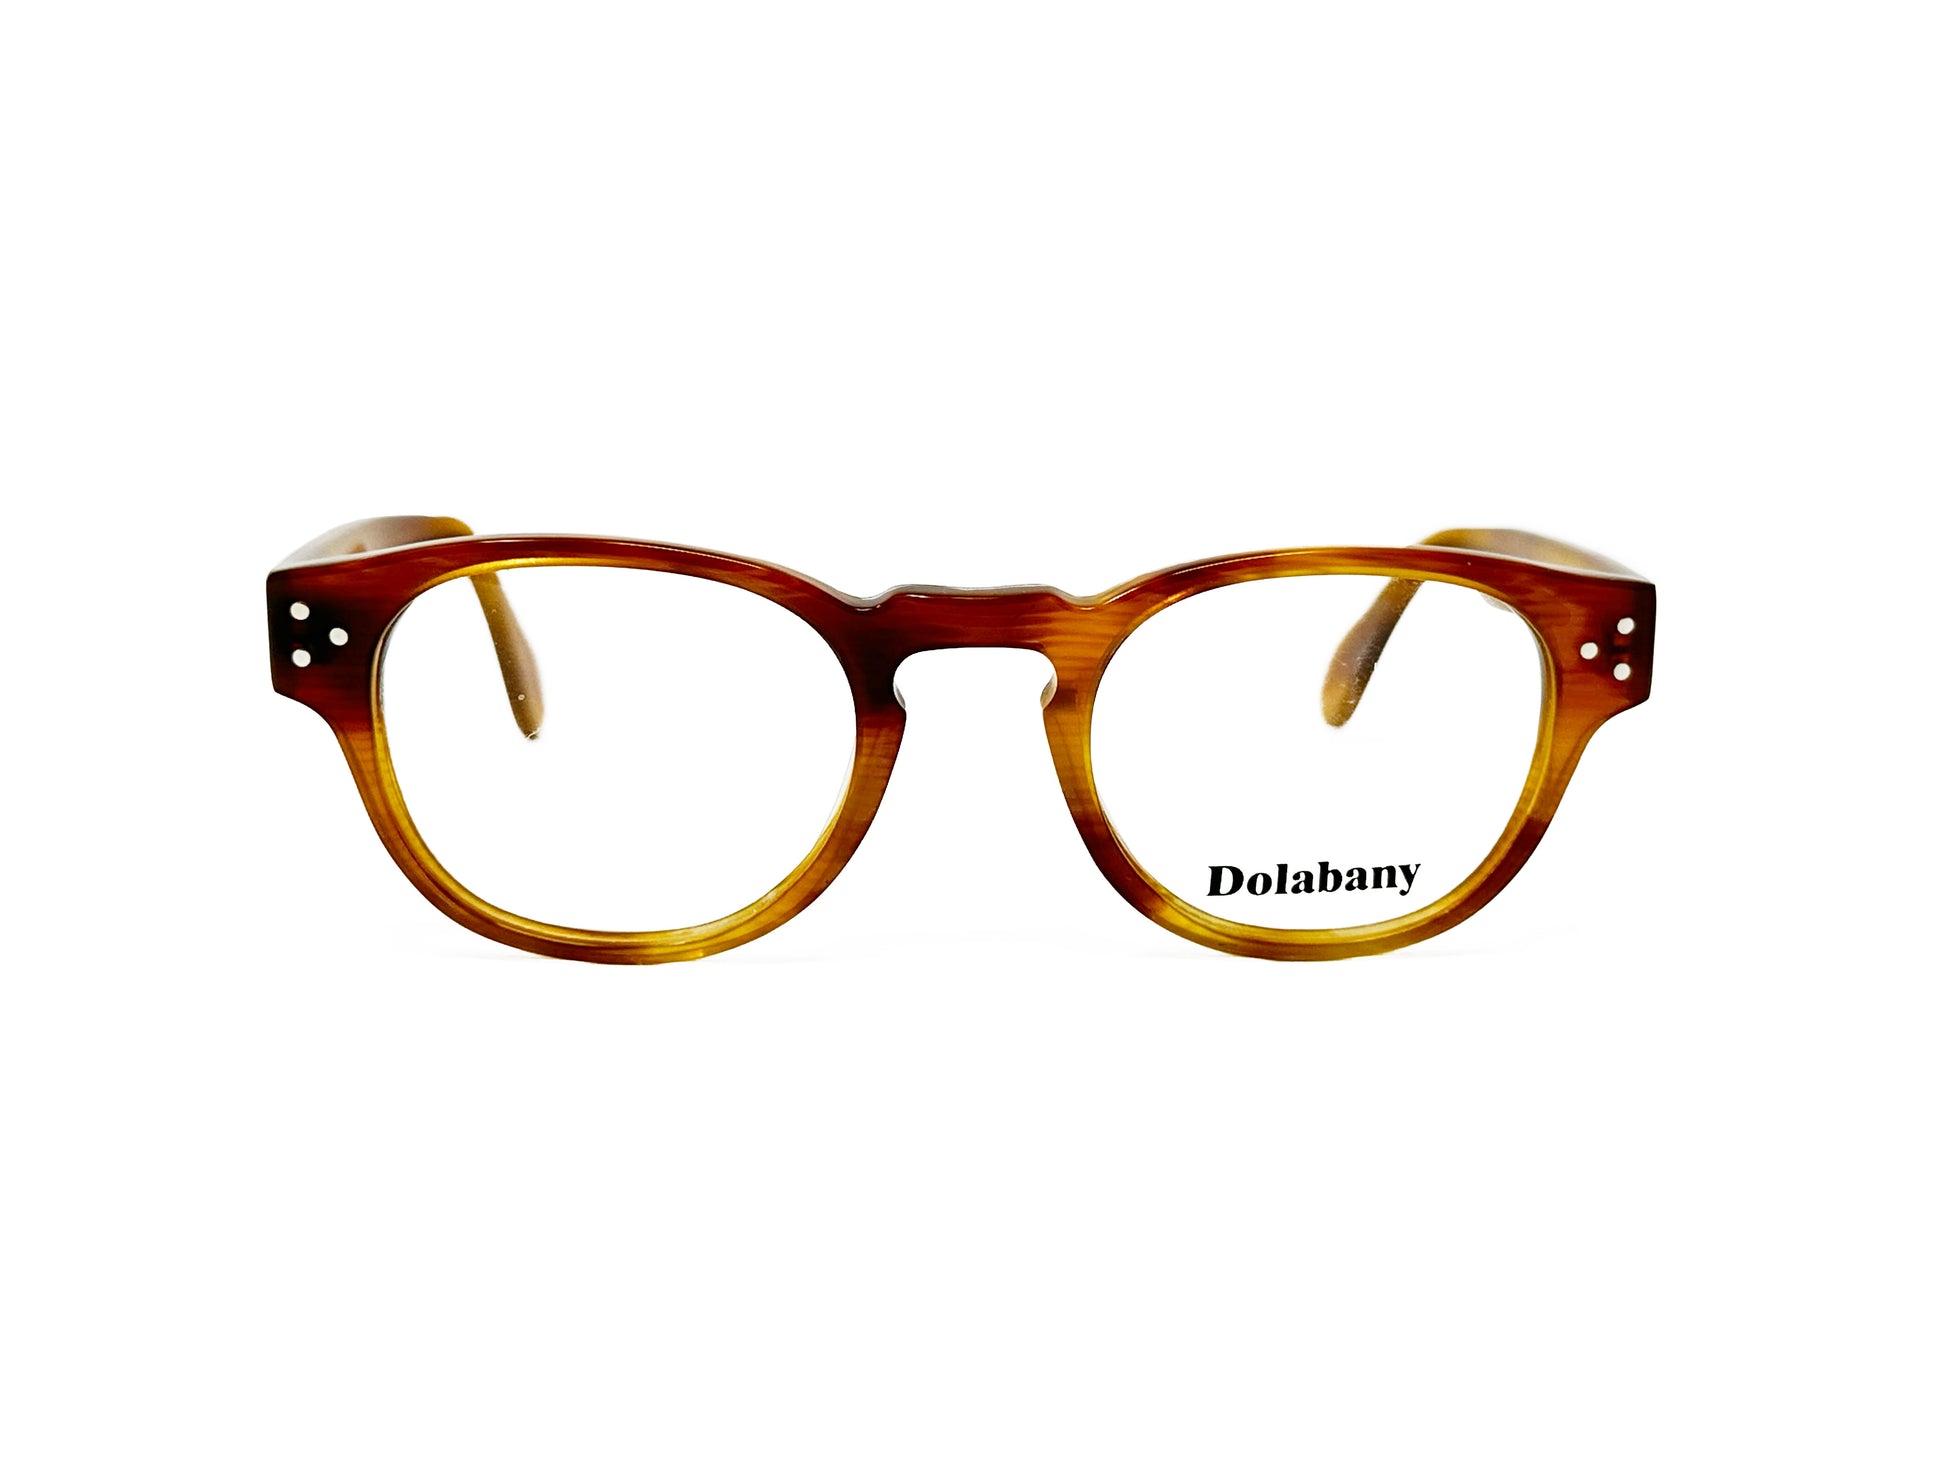 Dolabany rounded-square optical frame with keyhole bridge. Model: Alfred. Color: Blond Streak - Light Tortoise. Front view. 